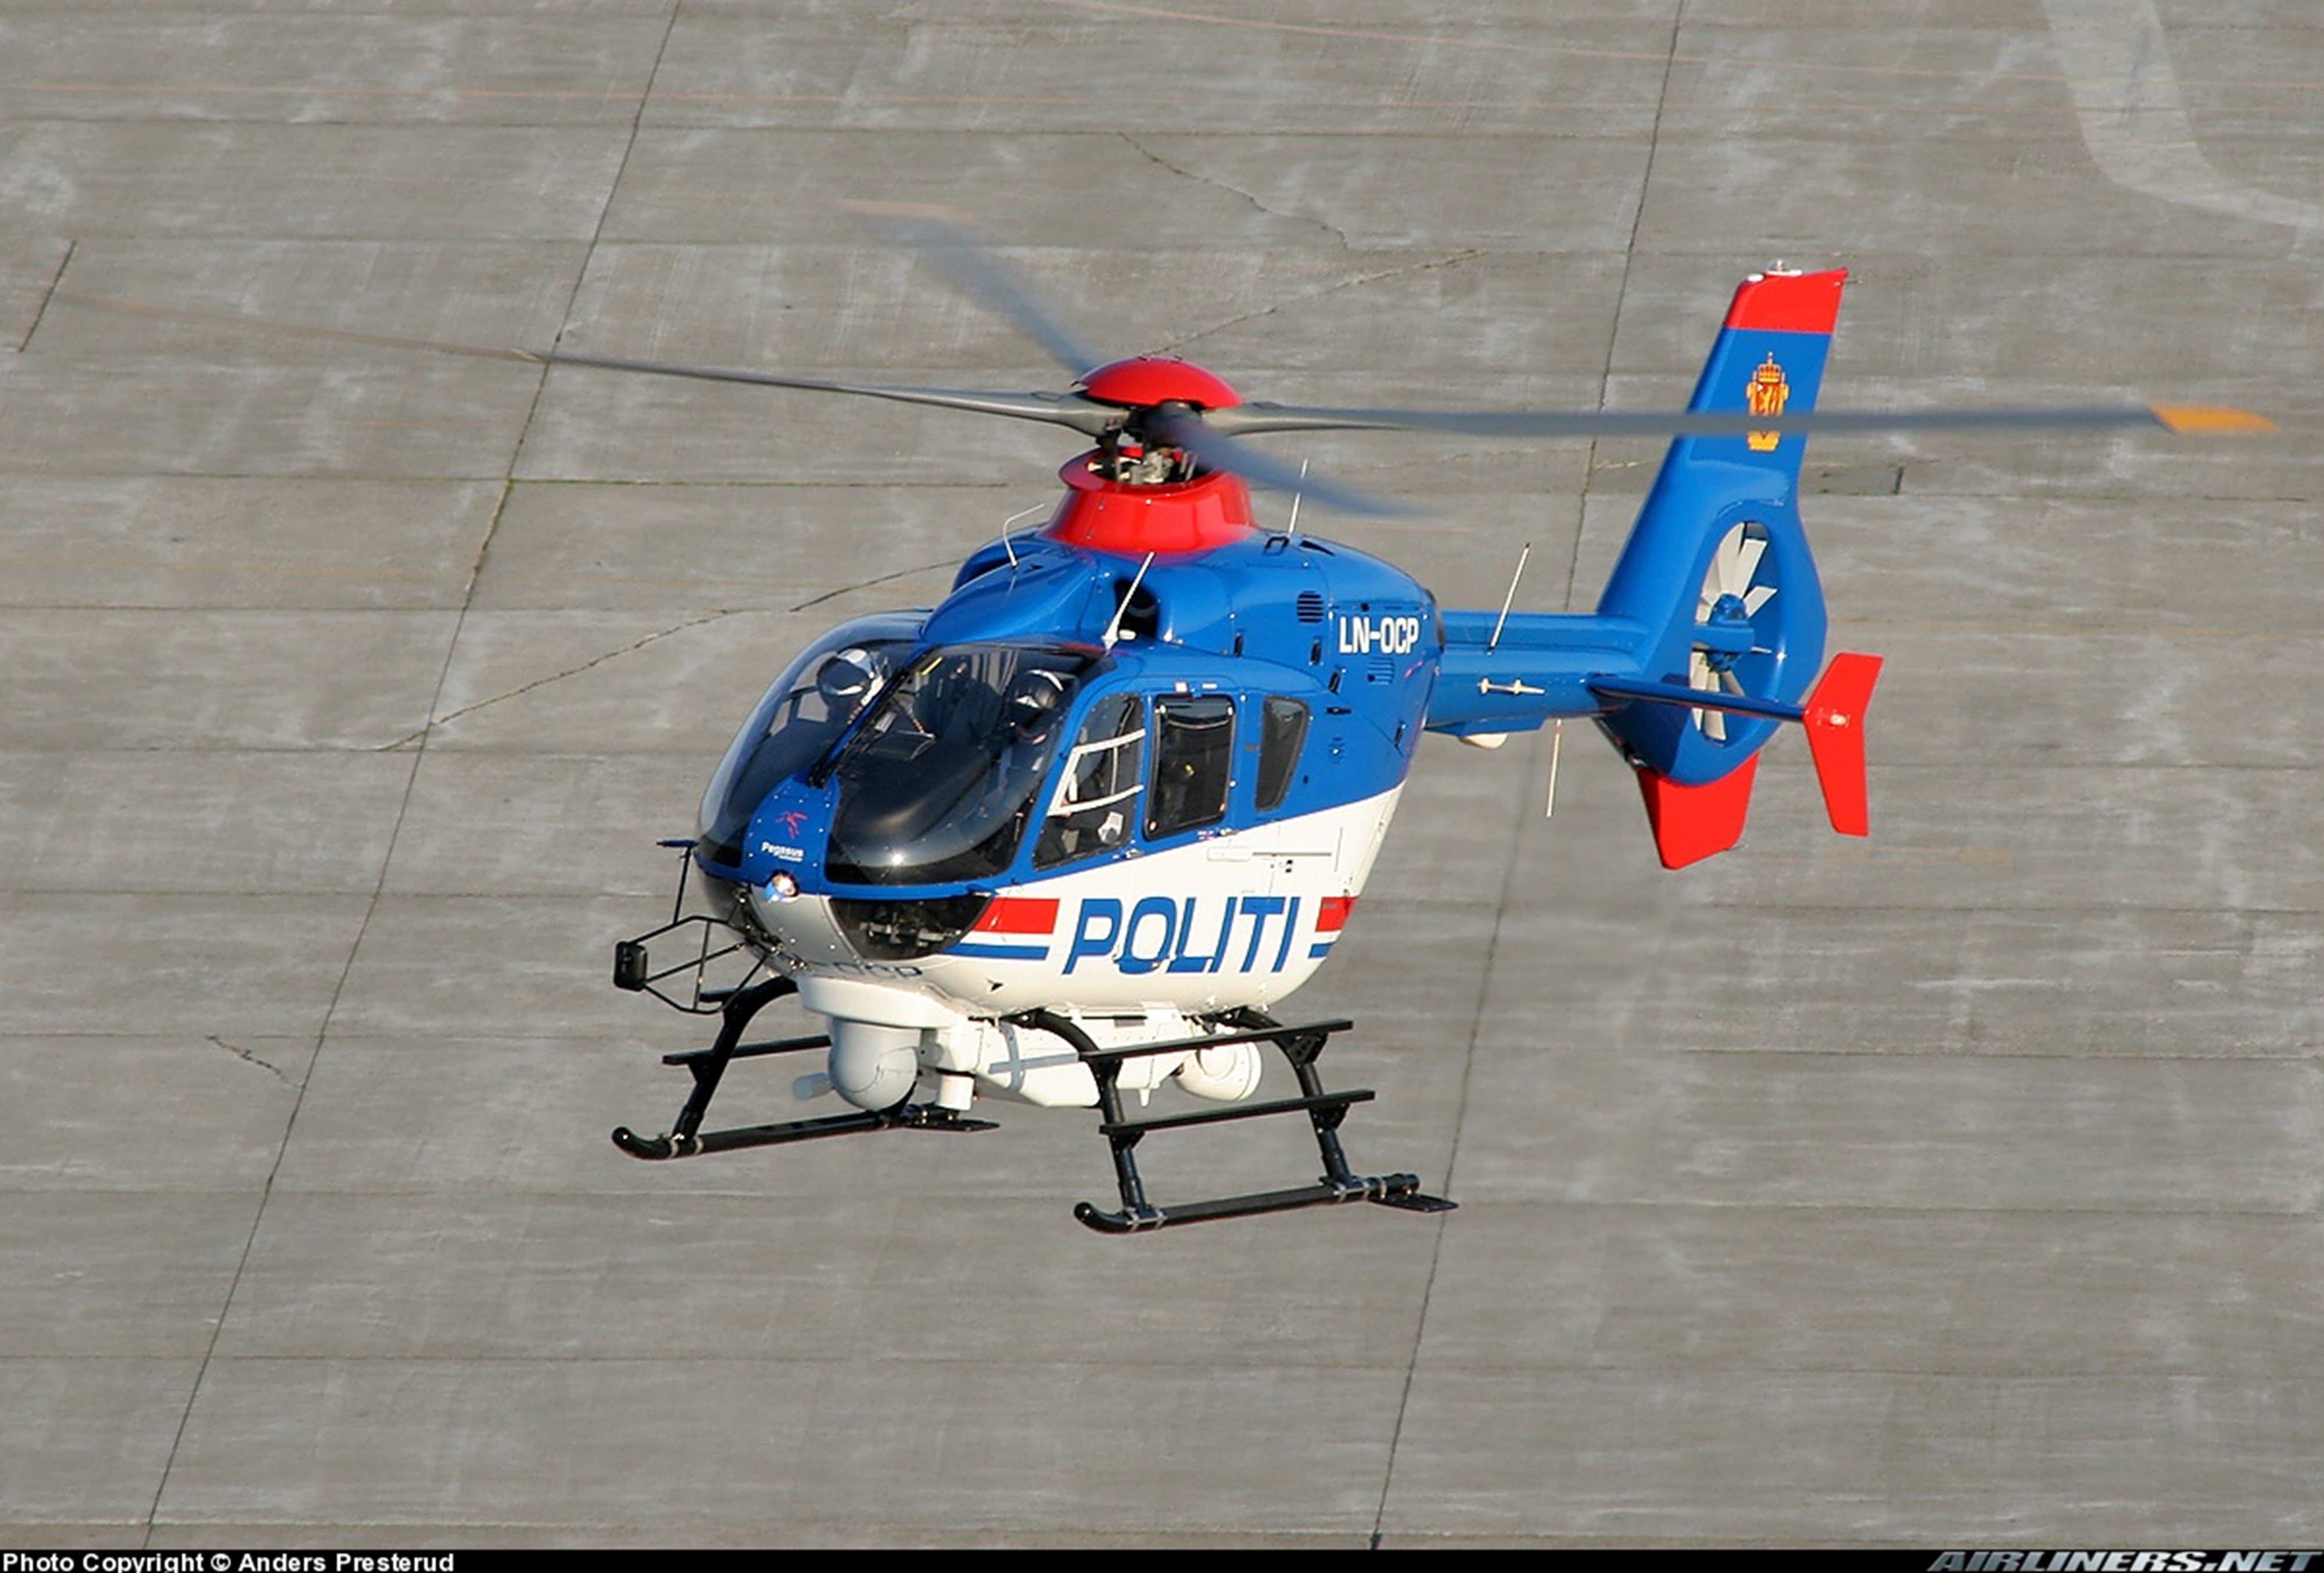 helicopter, Aircraft, Police, Finland, Eurocopter, Ec 135 Wallpaper